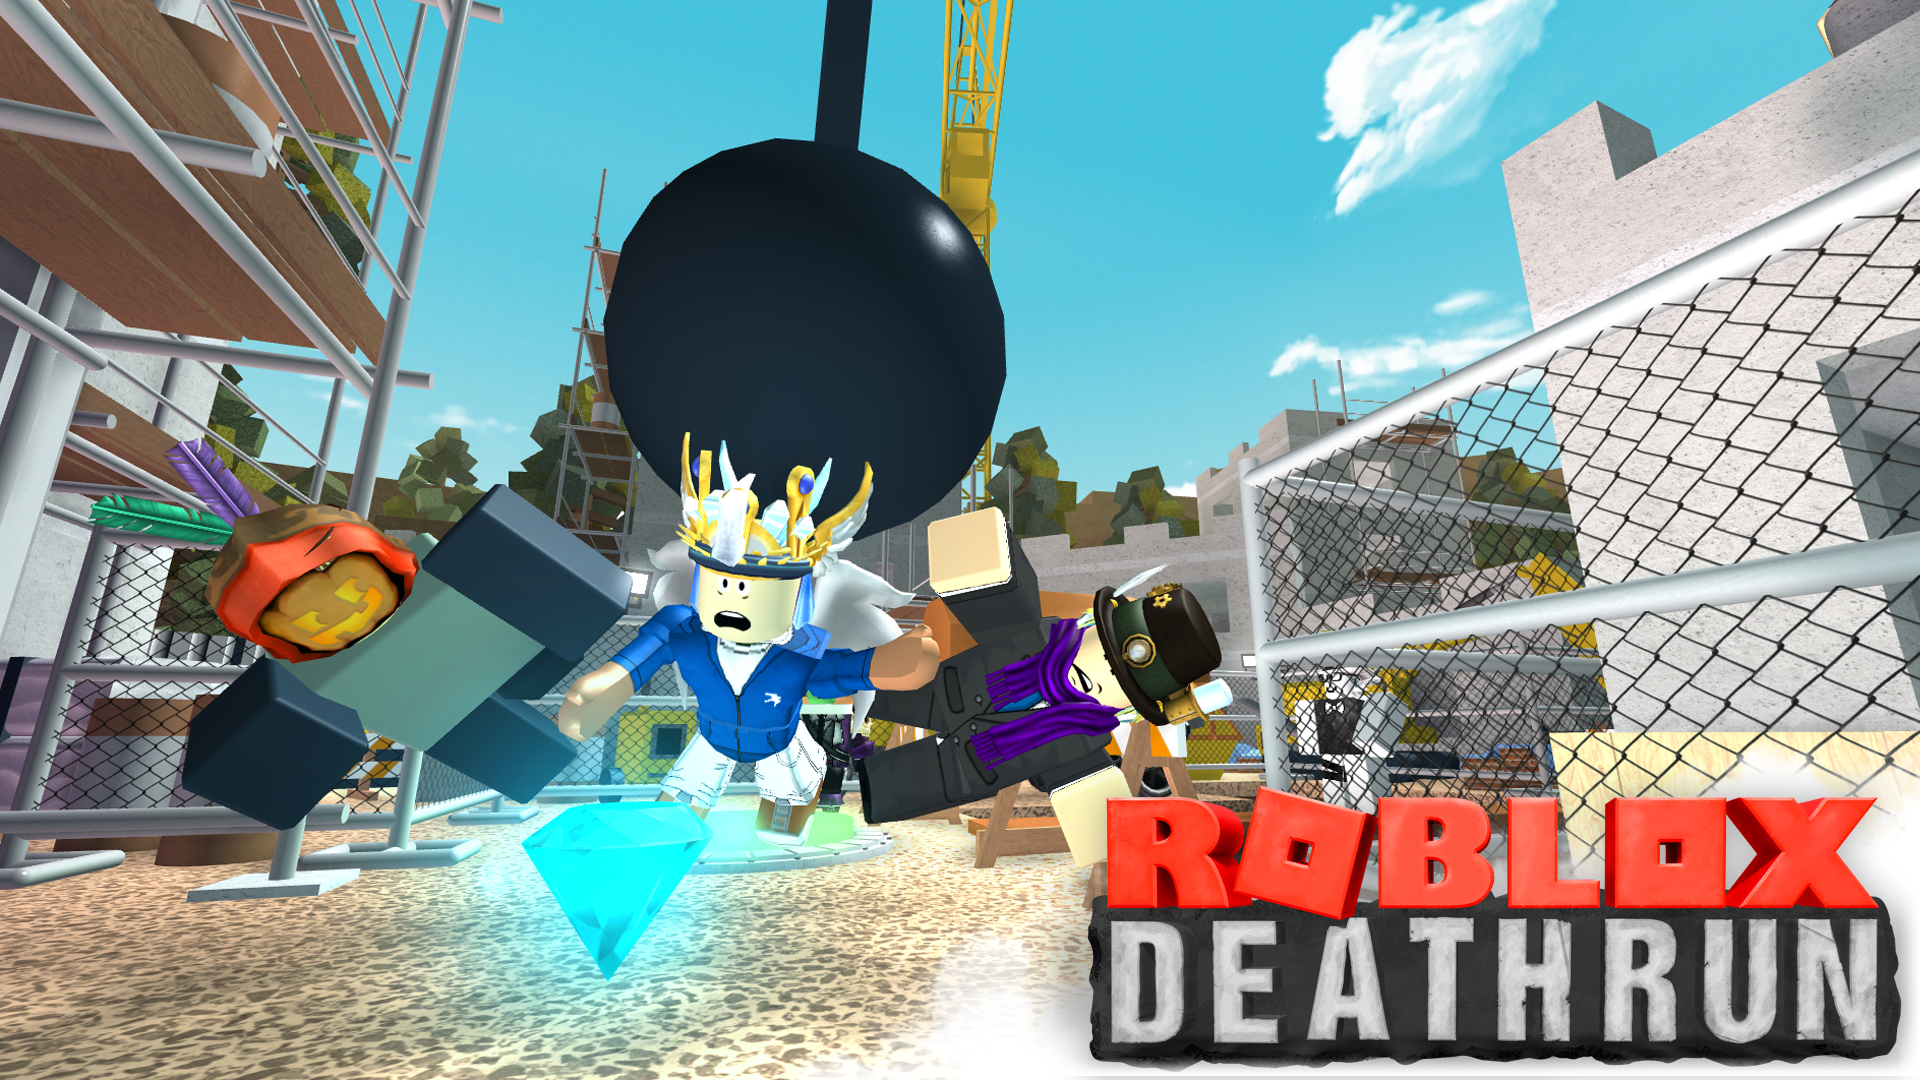 DEATHRUN TV download the new version